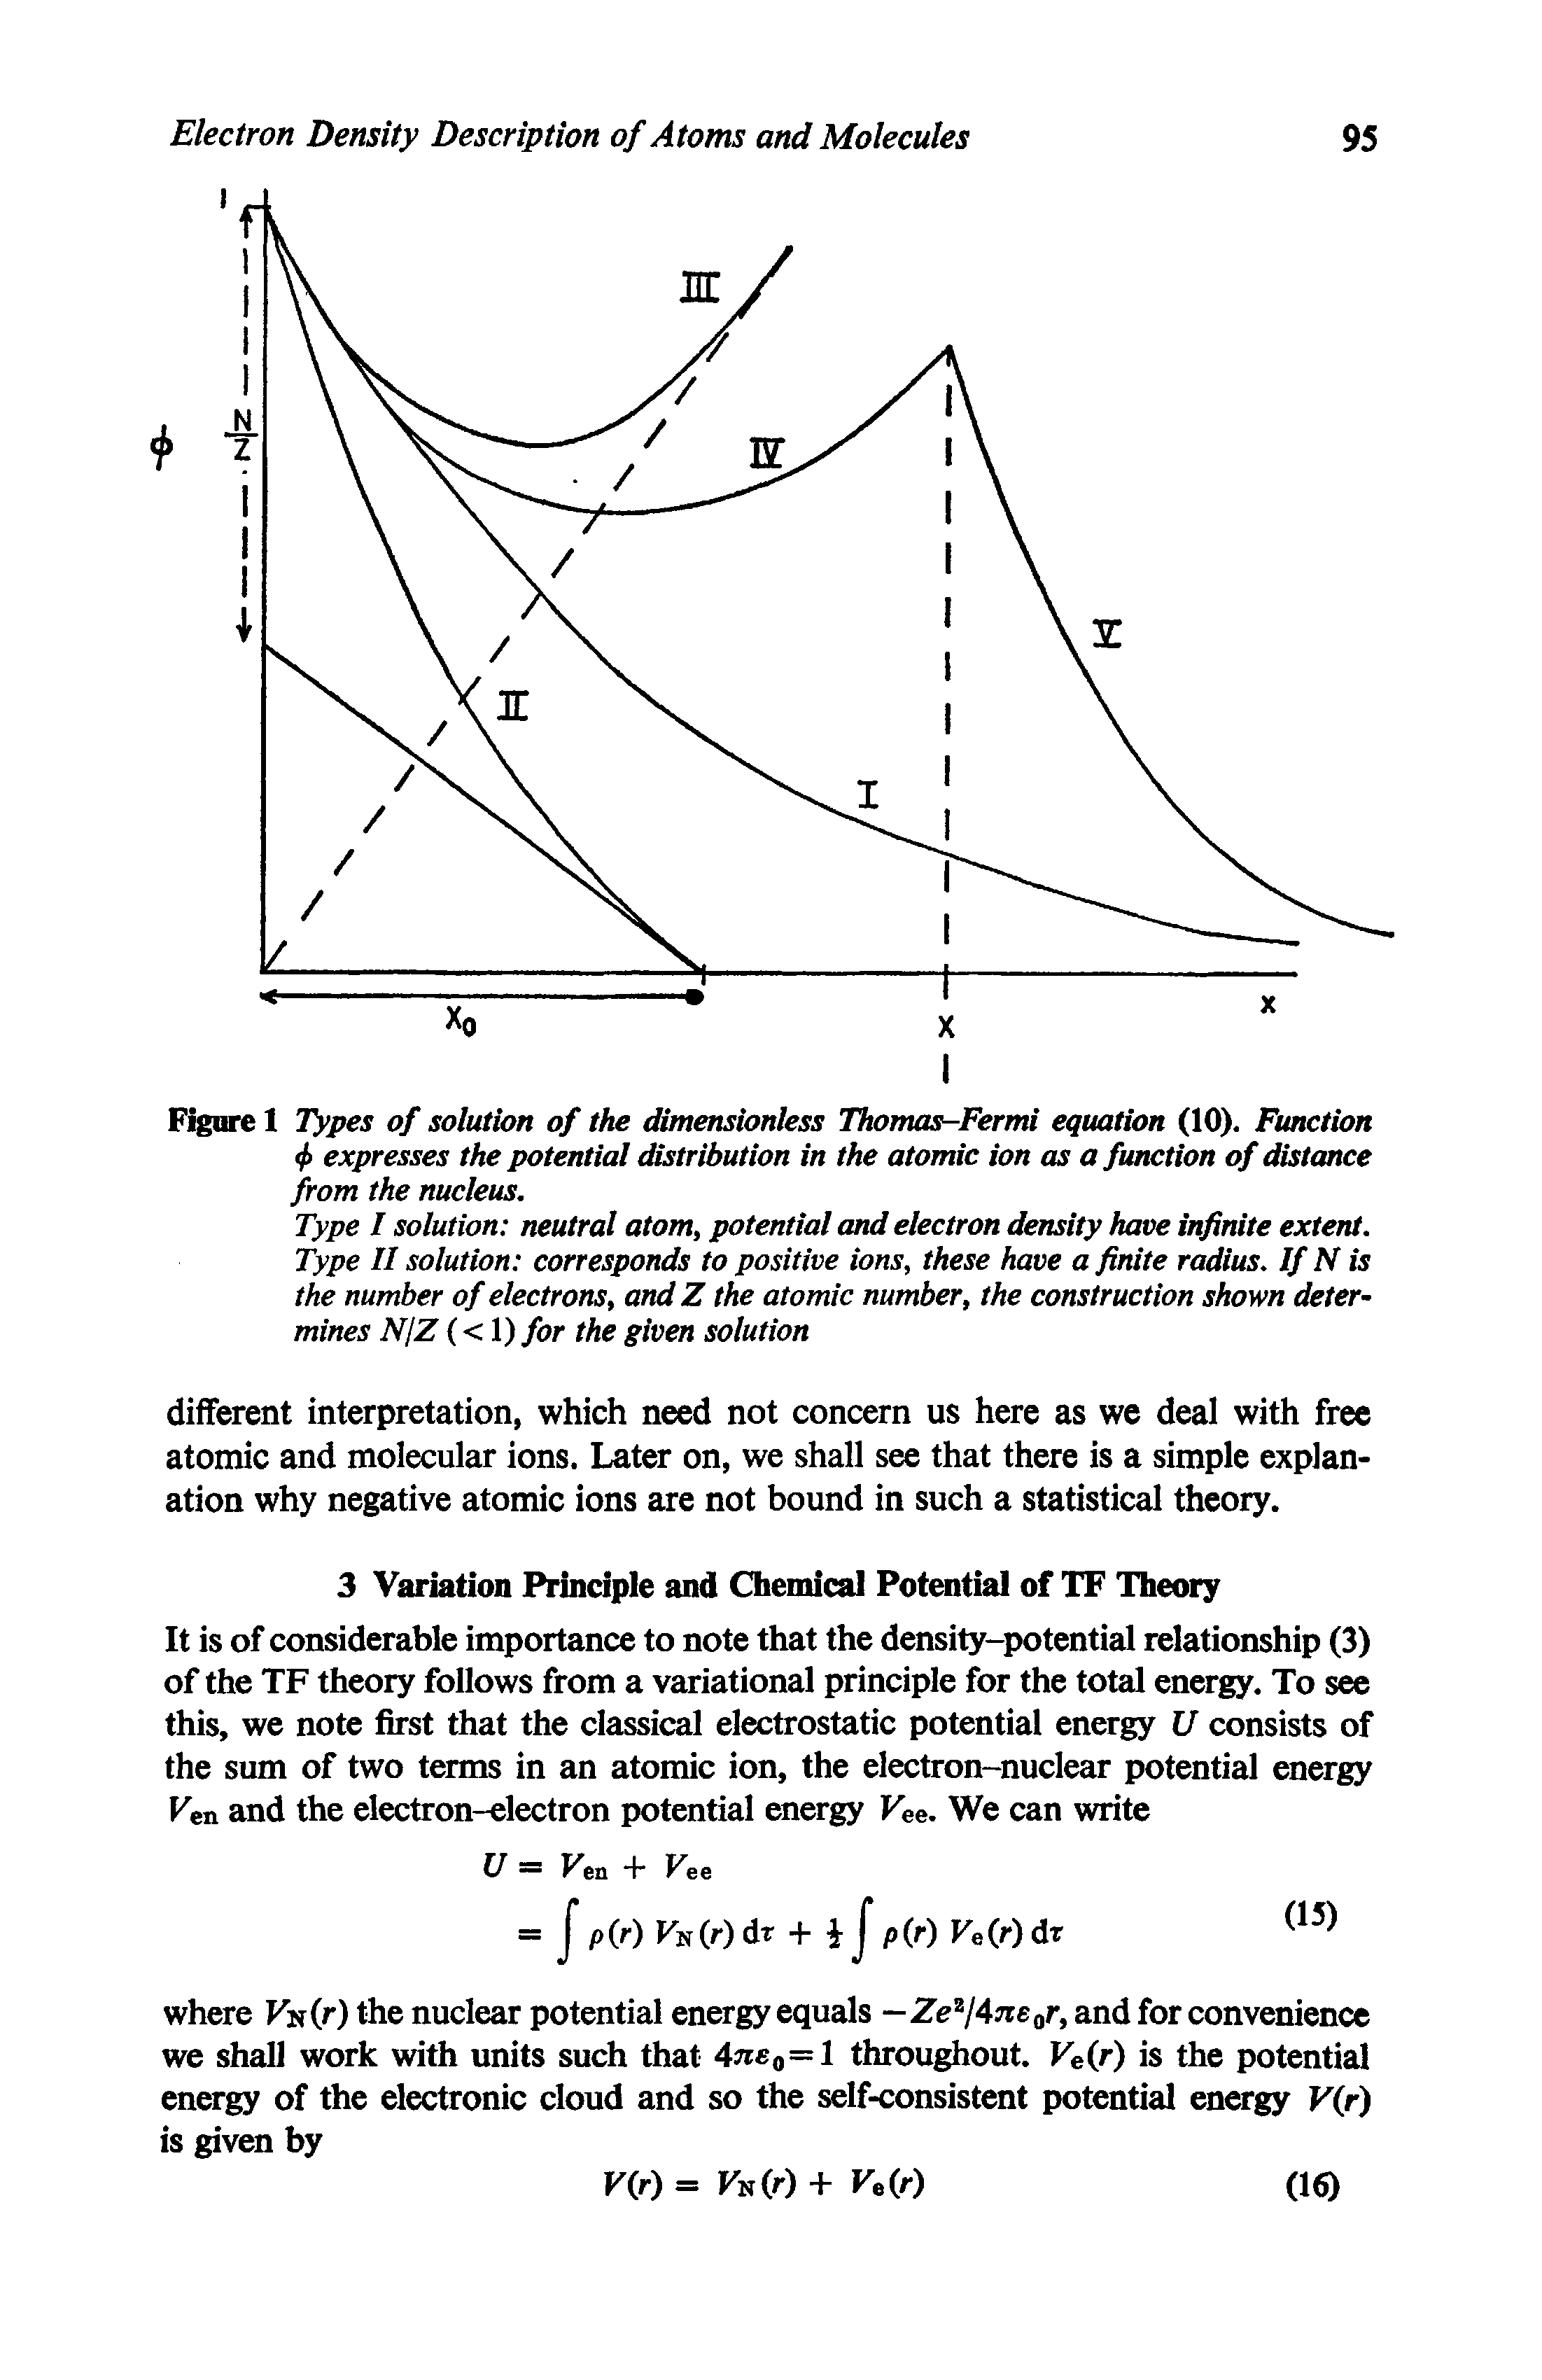 Figure 1 Types of solution of the dimensionless Thomas-Fermi equation (10). Function 4> expresses the potential distribution in the atomic ion as a function of distance from the nucleus.